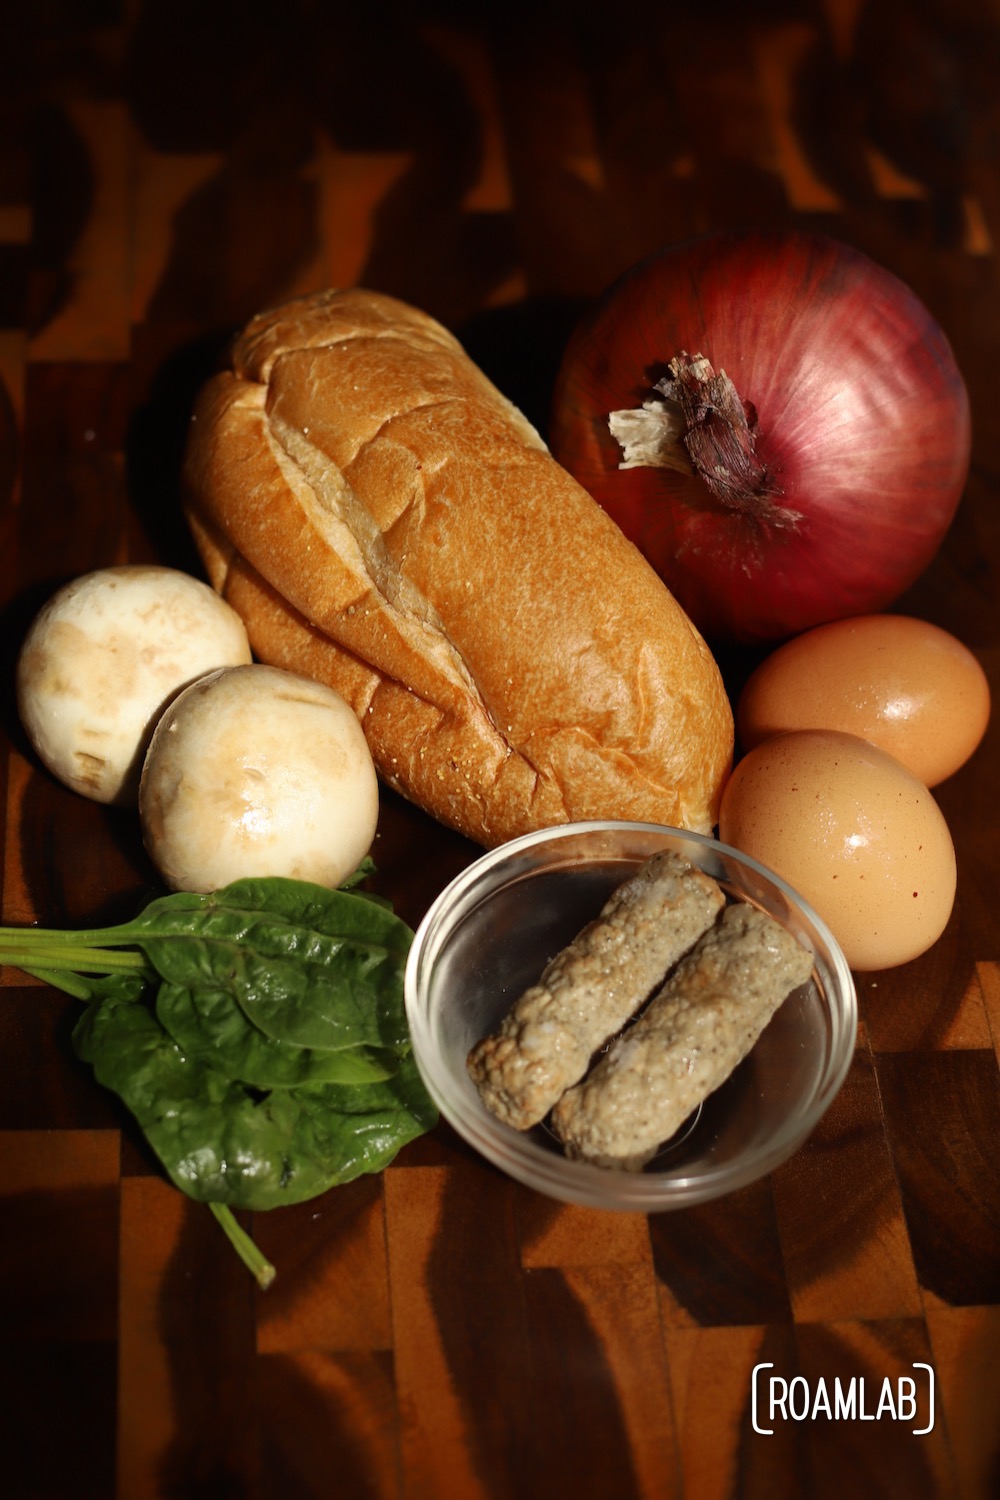 Key ingredients for our egg boats dutch oven campfire cooking recipe laid out (hoagie roll, red onion, white mushrooms, eggs, sausage, spinach)